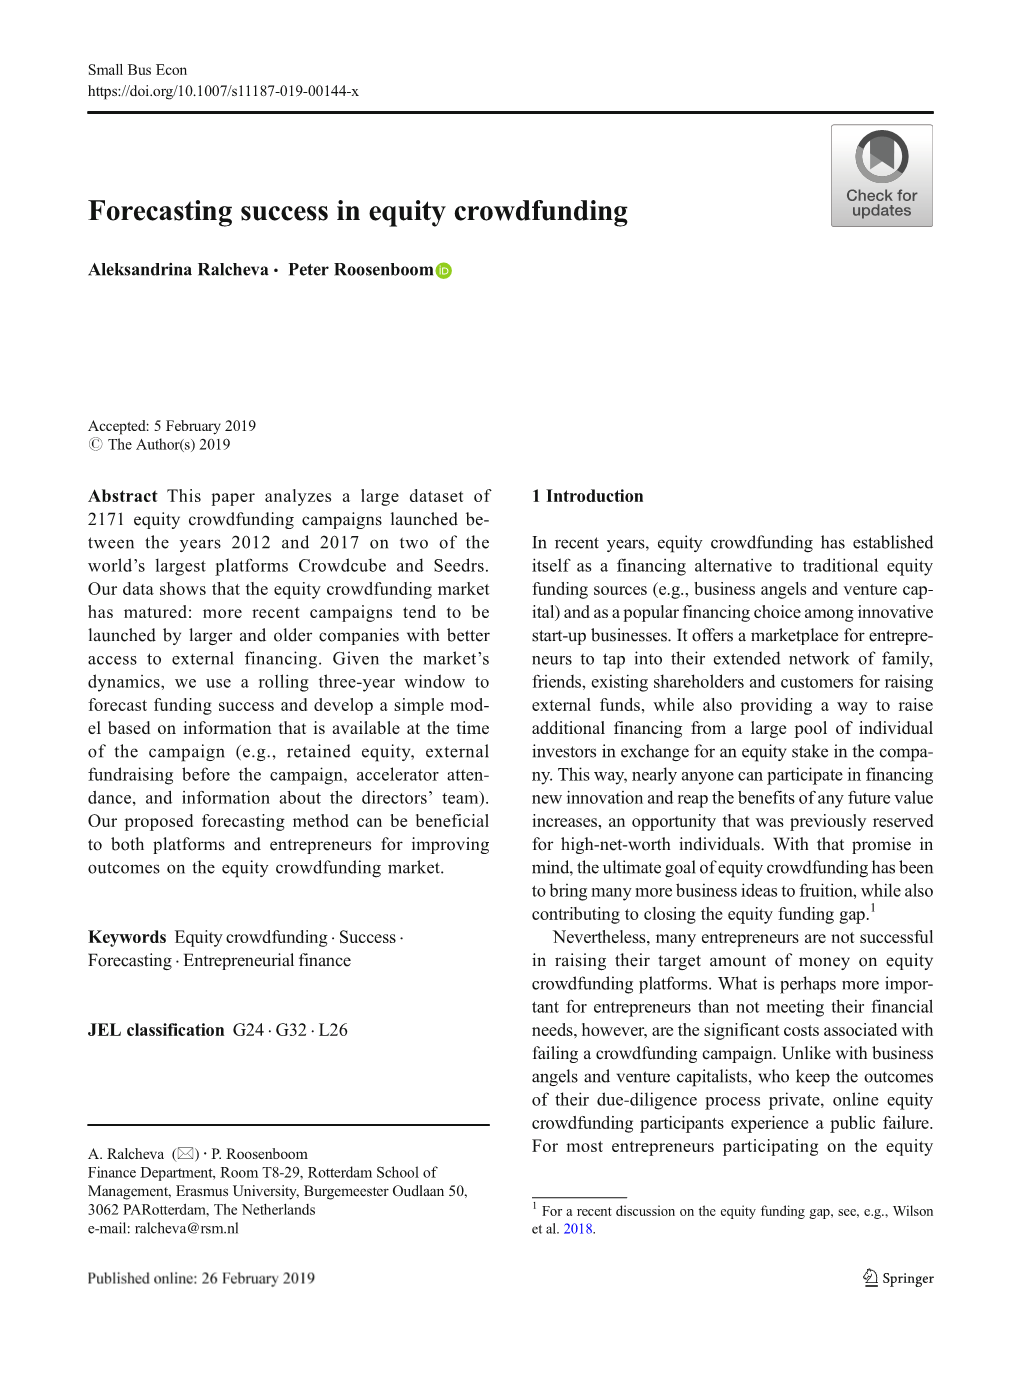 Forecasting Success in Equity Crowdfunding